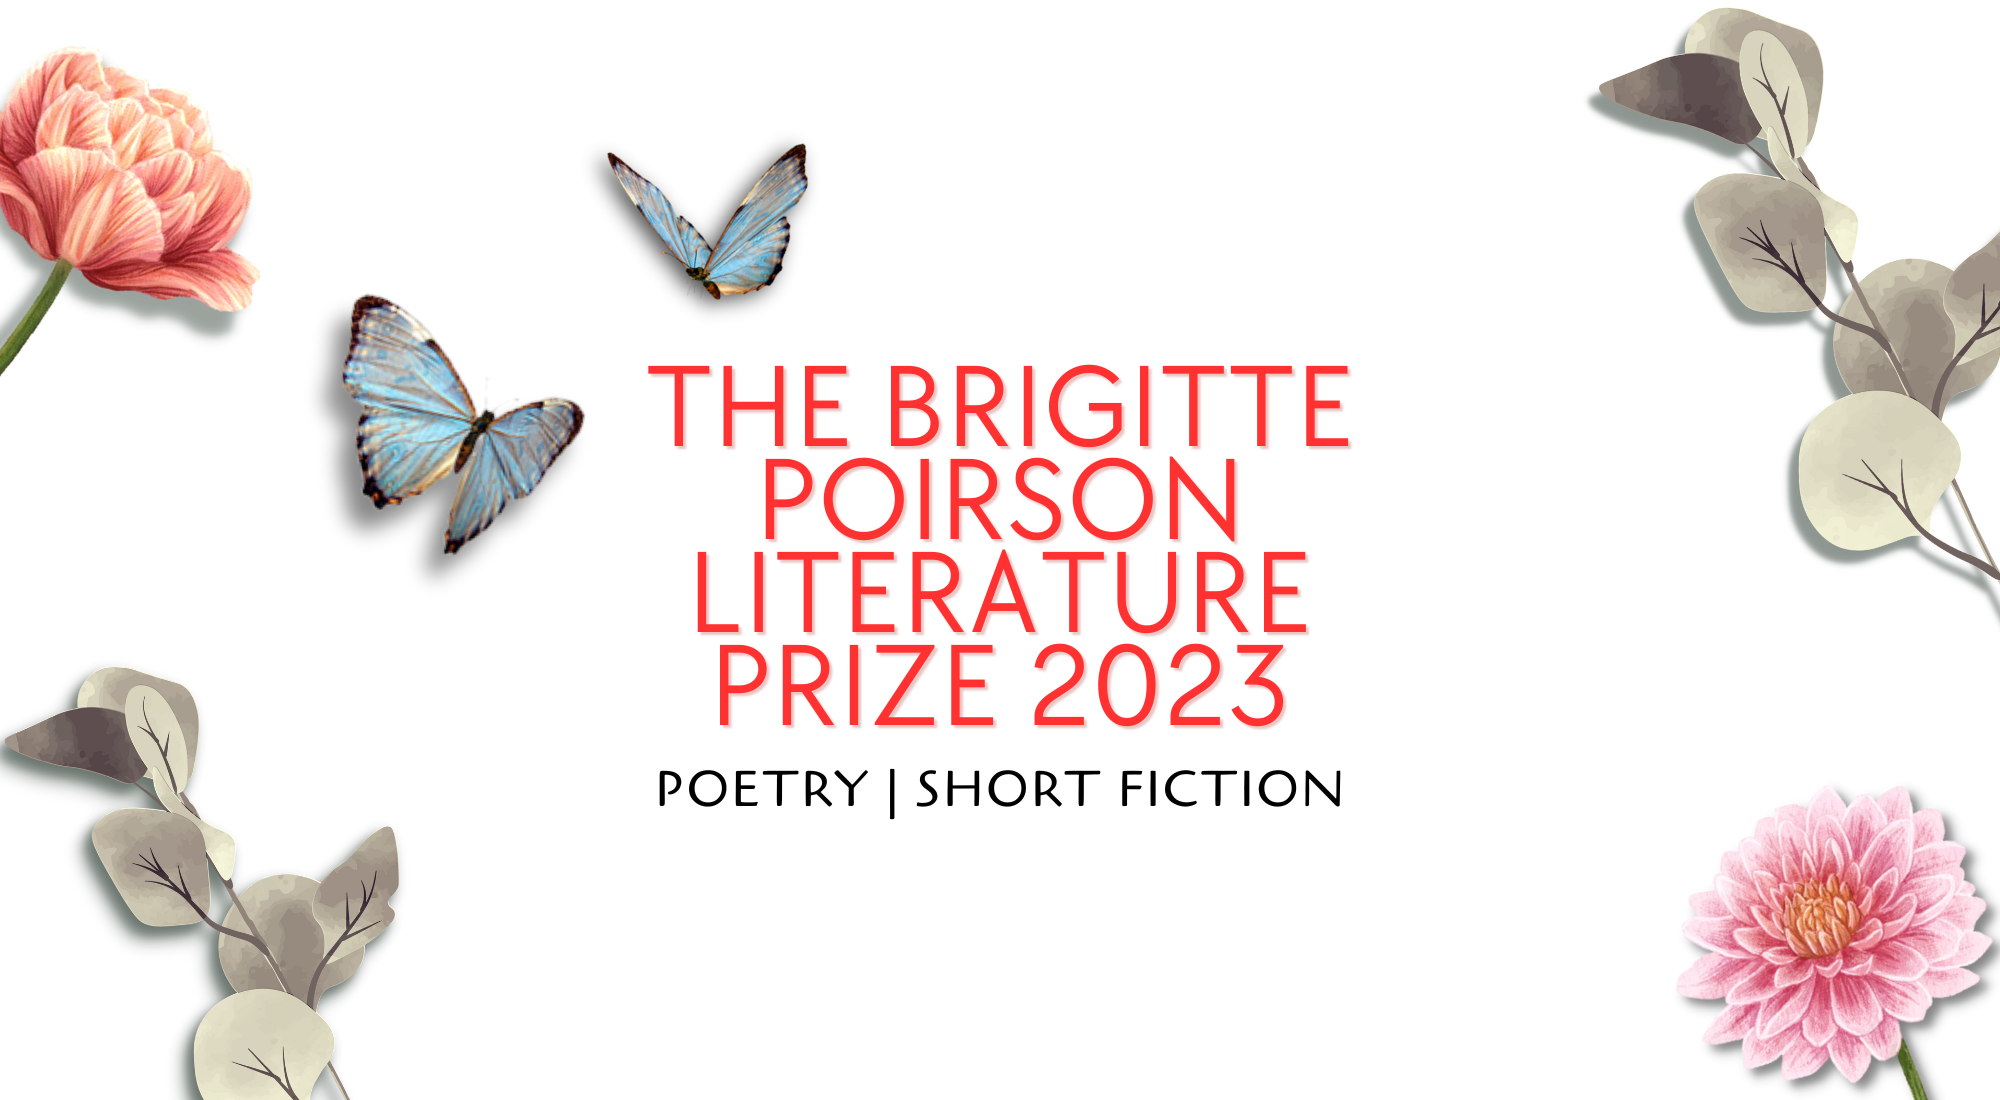 Call for Submissions: The Brigitte Poirson Literature Prize 2023